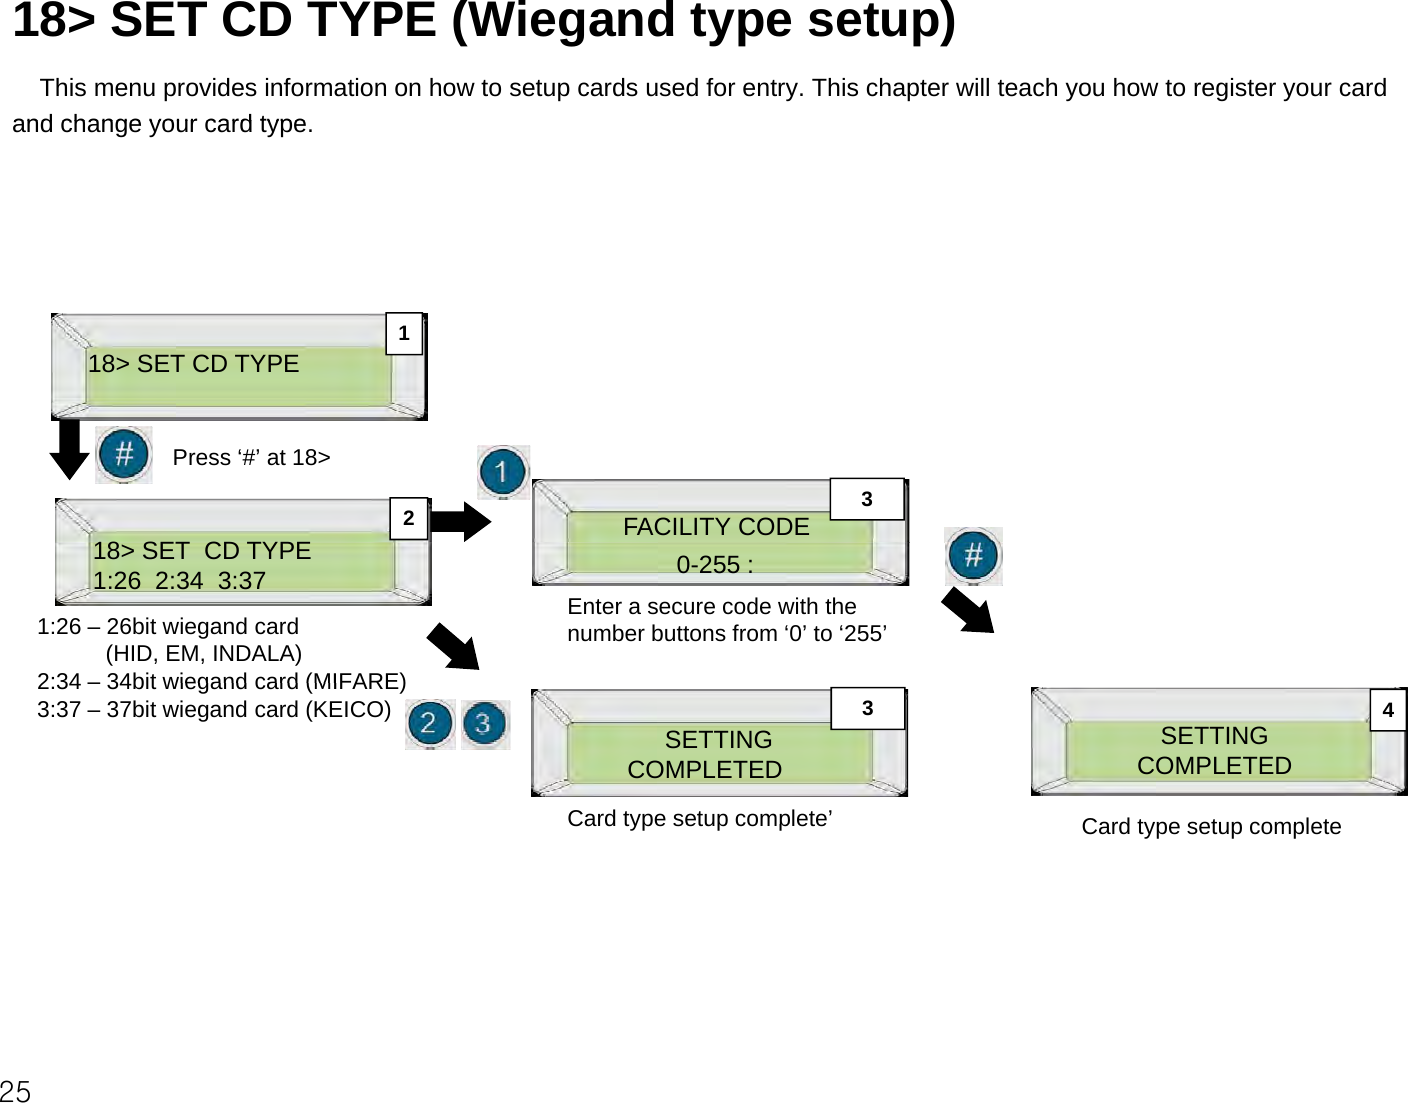 18&gt; SET CD TYPE (Wiegand type setup)This menu provides information on how to setup cards used for entry. This chapter will teach you how to register your card and change your card typeand change your card type.18&gt; SET CD TYPE118 SET CD TYPEFACILITY CODE  23Press ‘#’ at 18&gt;18&gt; SET  CD TYPE1:26  2:34  3:37 0-255 :1:26 – 26bit wiegand card (HID, EM, INDALA)2:34–34bit wiegand card (MIFARE)Enter a secure code with the number buttons from ‘0’ to ‘255’SETTINGCOMPLETEDSETTINGCOMPLETED 432:34 –34bit wiegand card (MIFARE) 3:37 – 37bit wiegand card (KEICO)Card type setup complete’Card type setup completeCard type setup completeCard type setup complete25